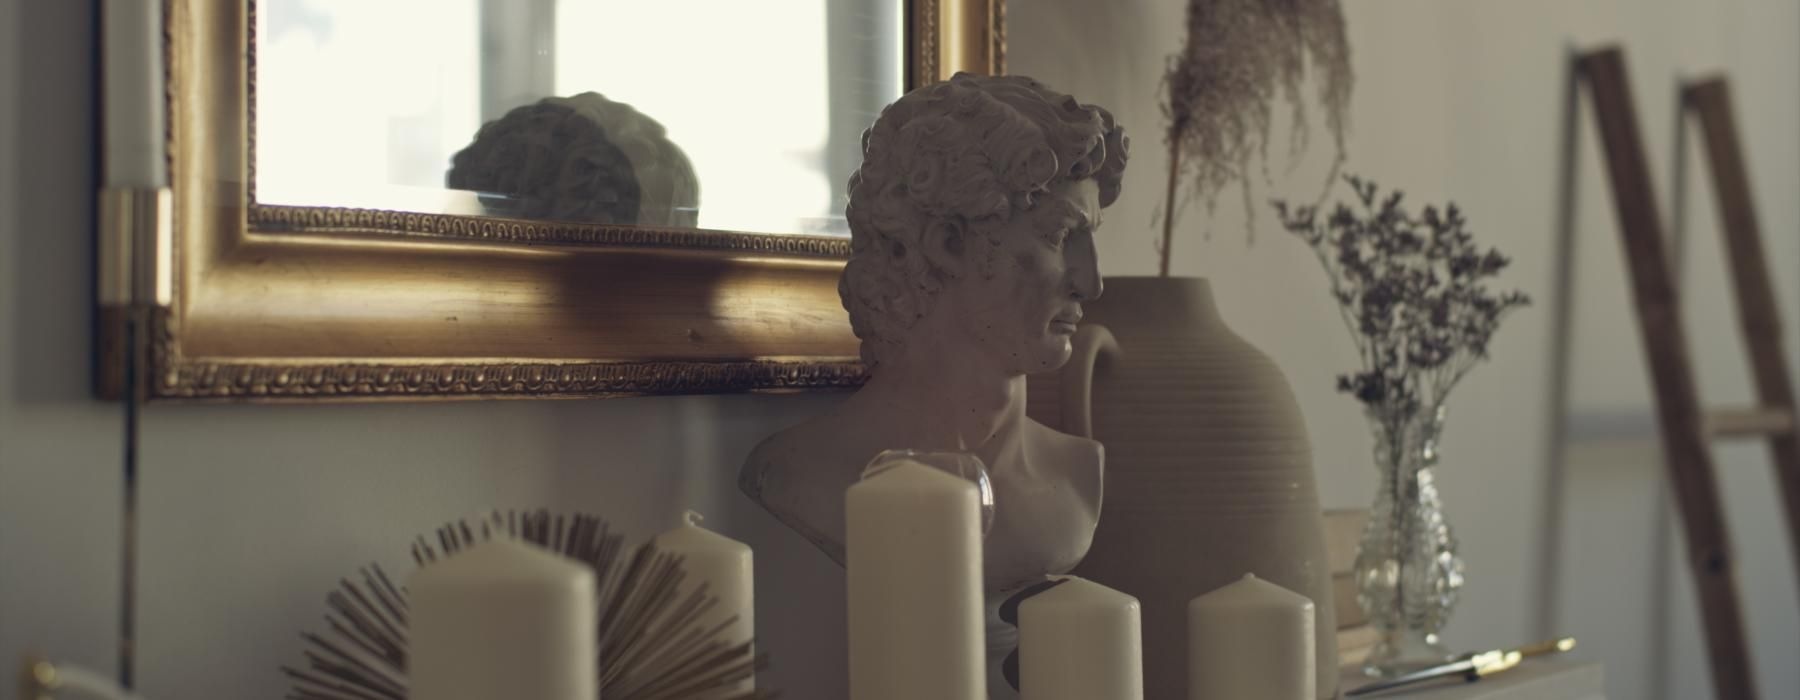 a head bust on a table with candles